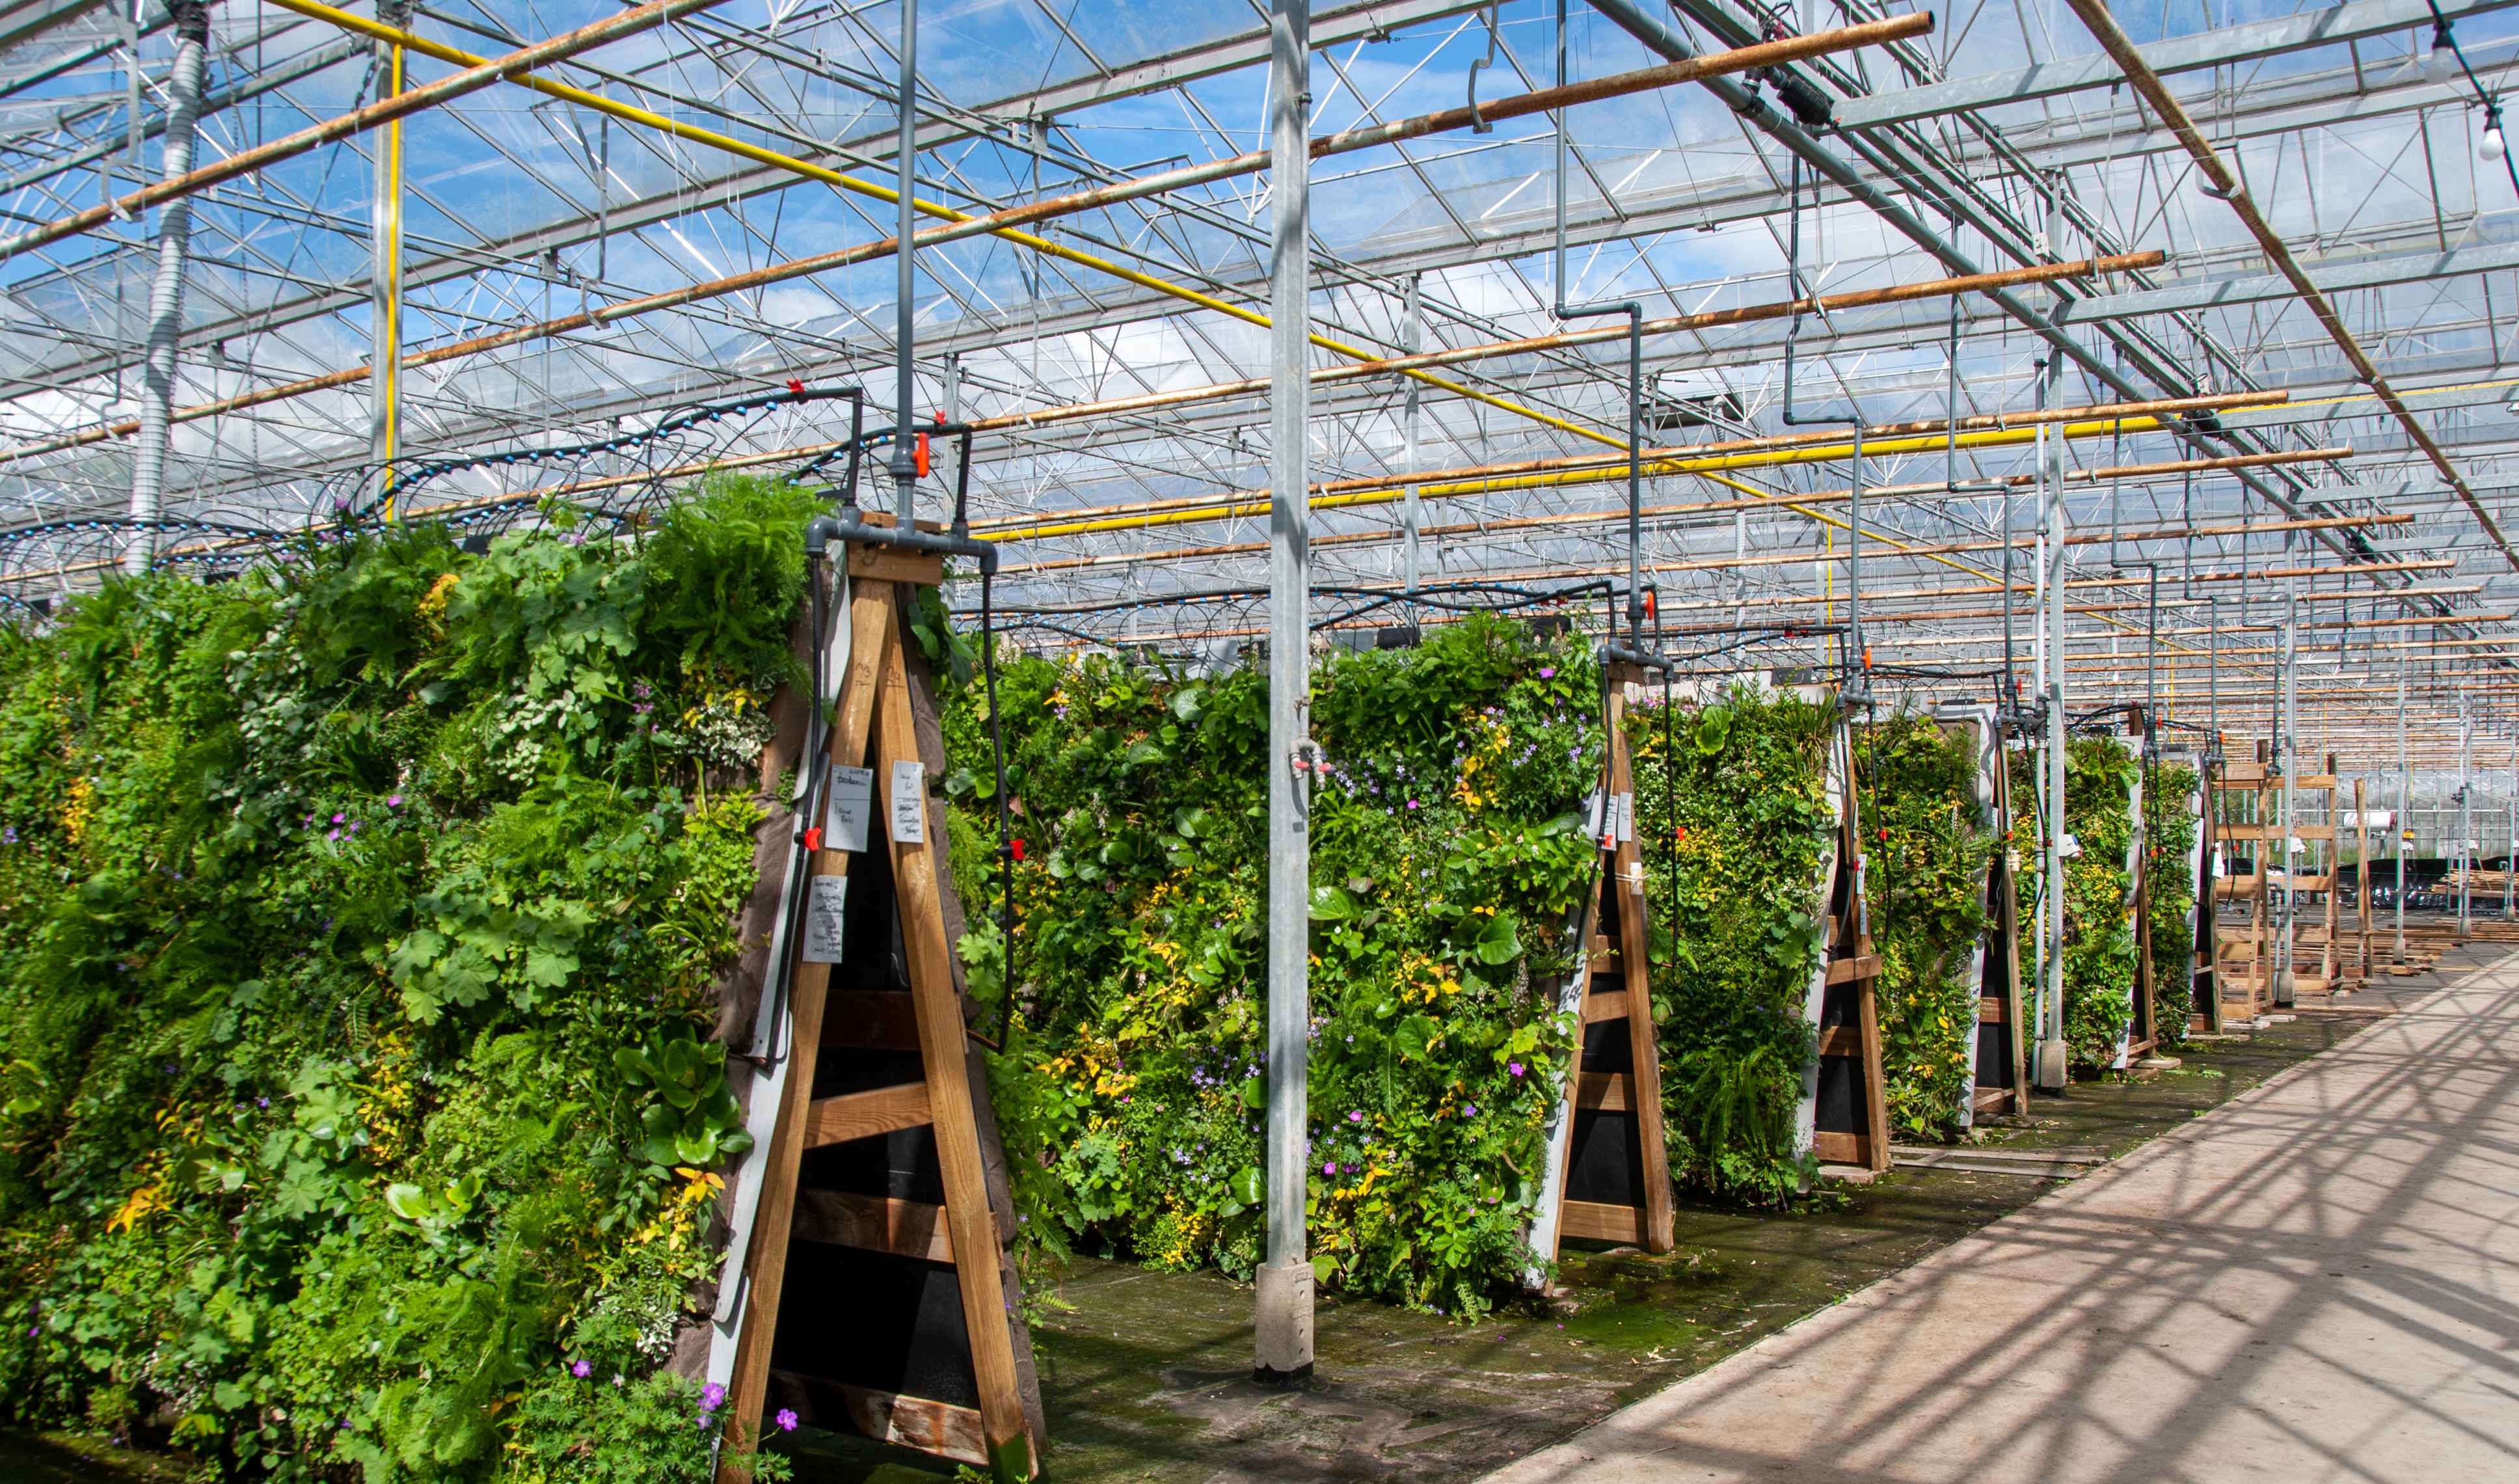 The Flexipanels are placed on vertical scaffolding and coupled to the irrigation system